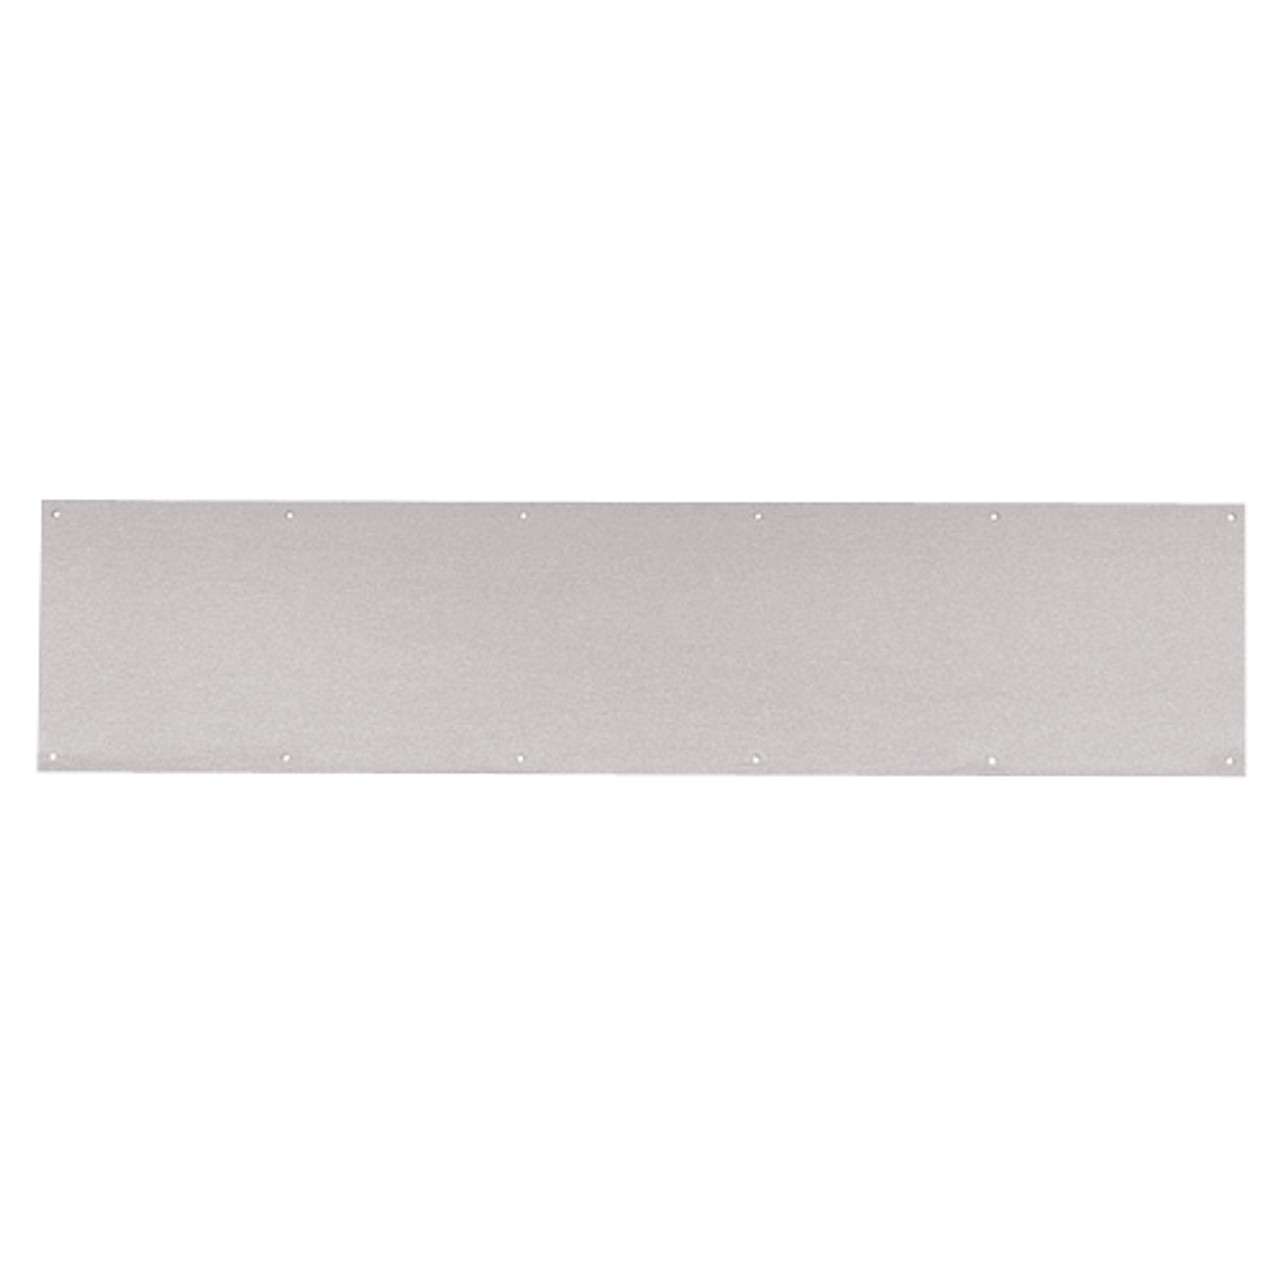 8400-US32D-8x15-B-CS Ives 8400 Series Protection Plate in Satin Stainless Steel